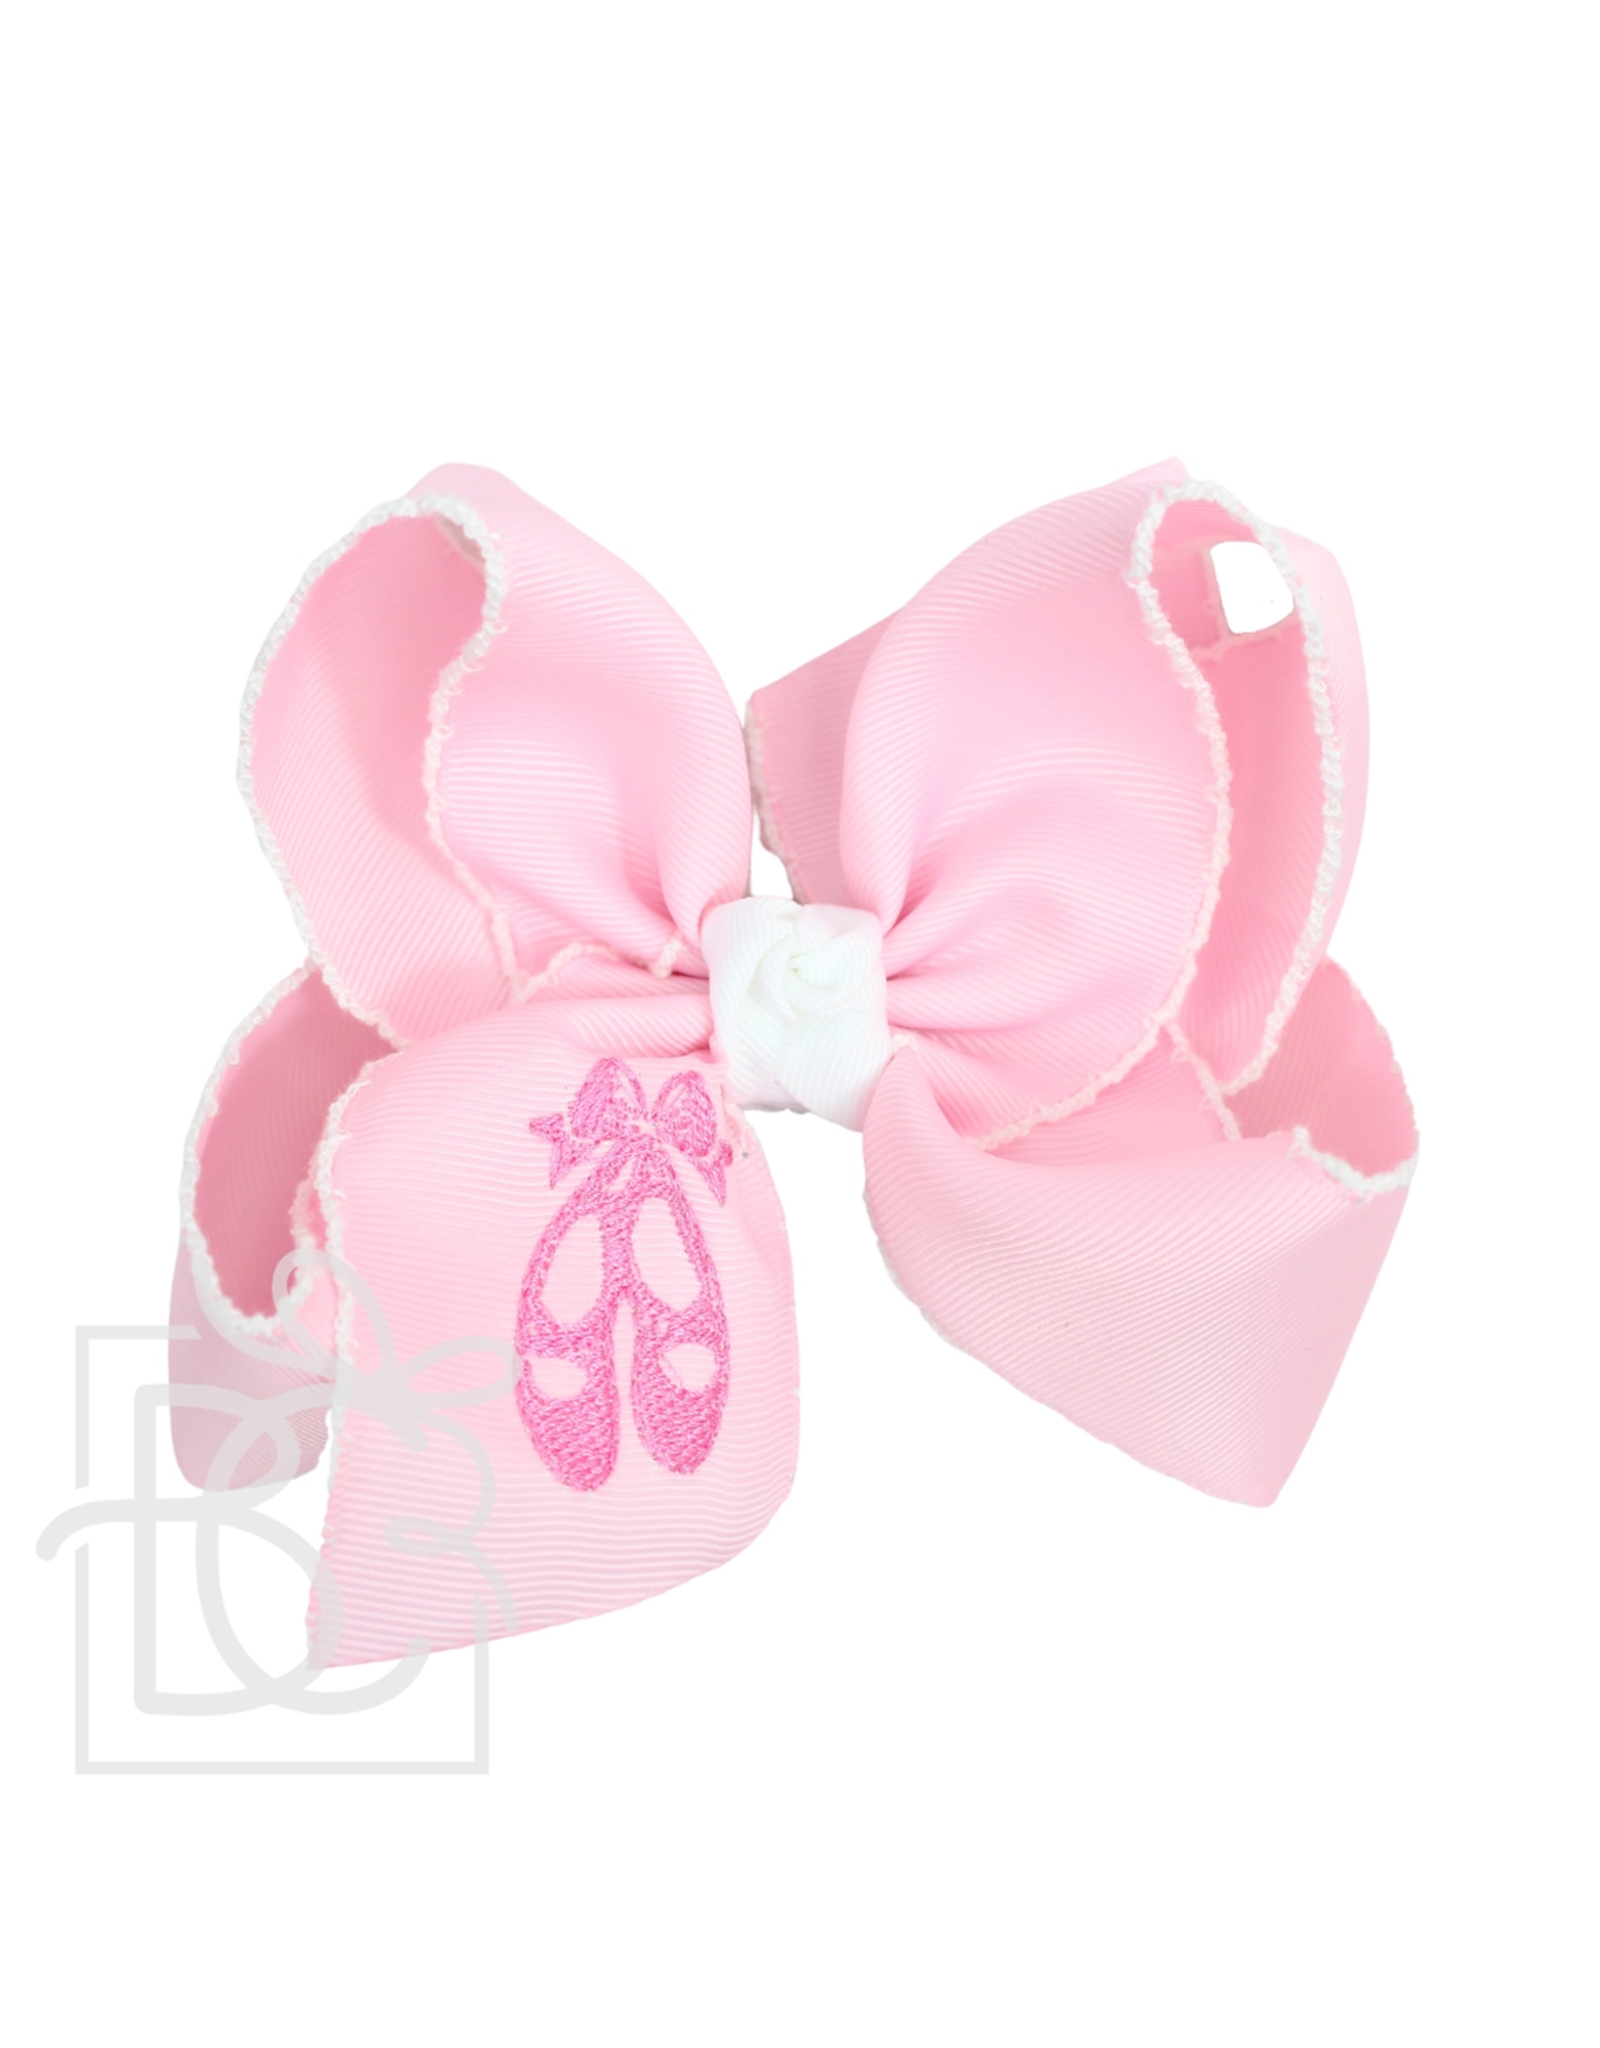 Beyond Creations ECKL Ballet Shoes Bow 117/156